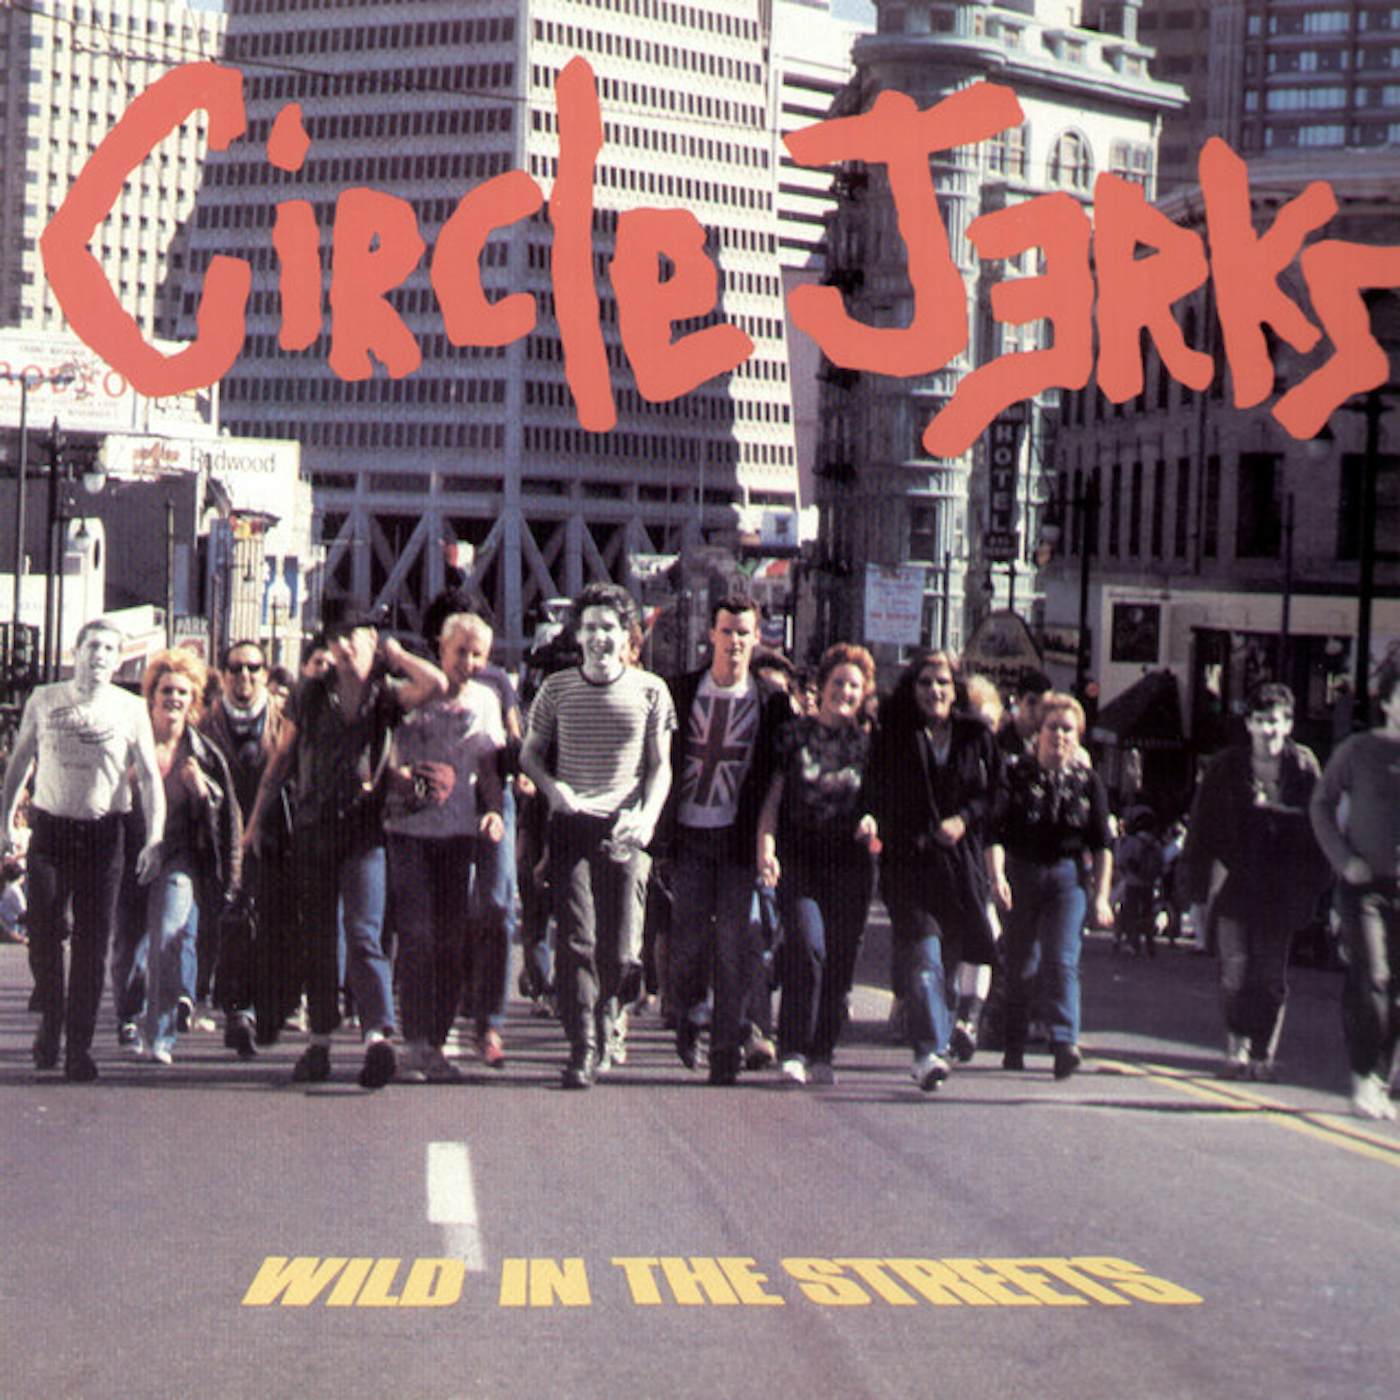 Circle Jerks Wild in the Streets CD